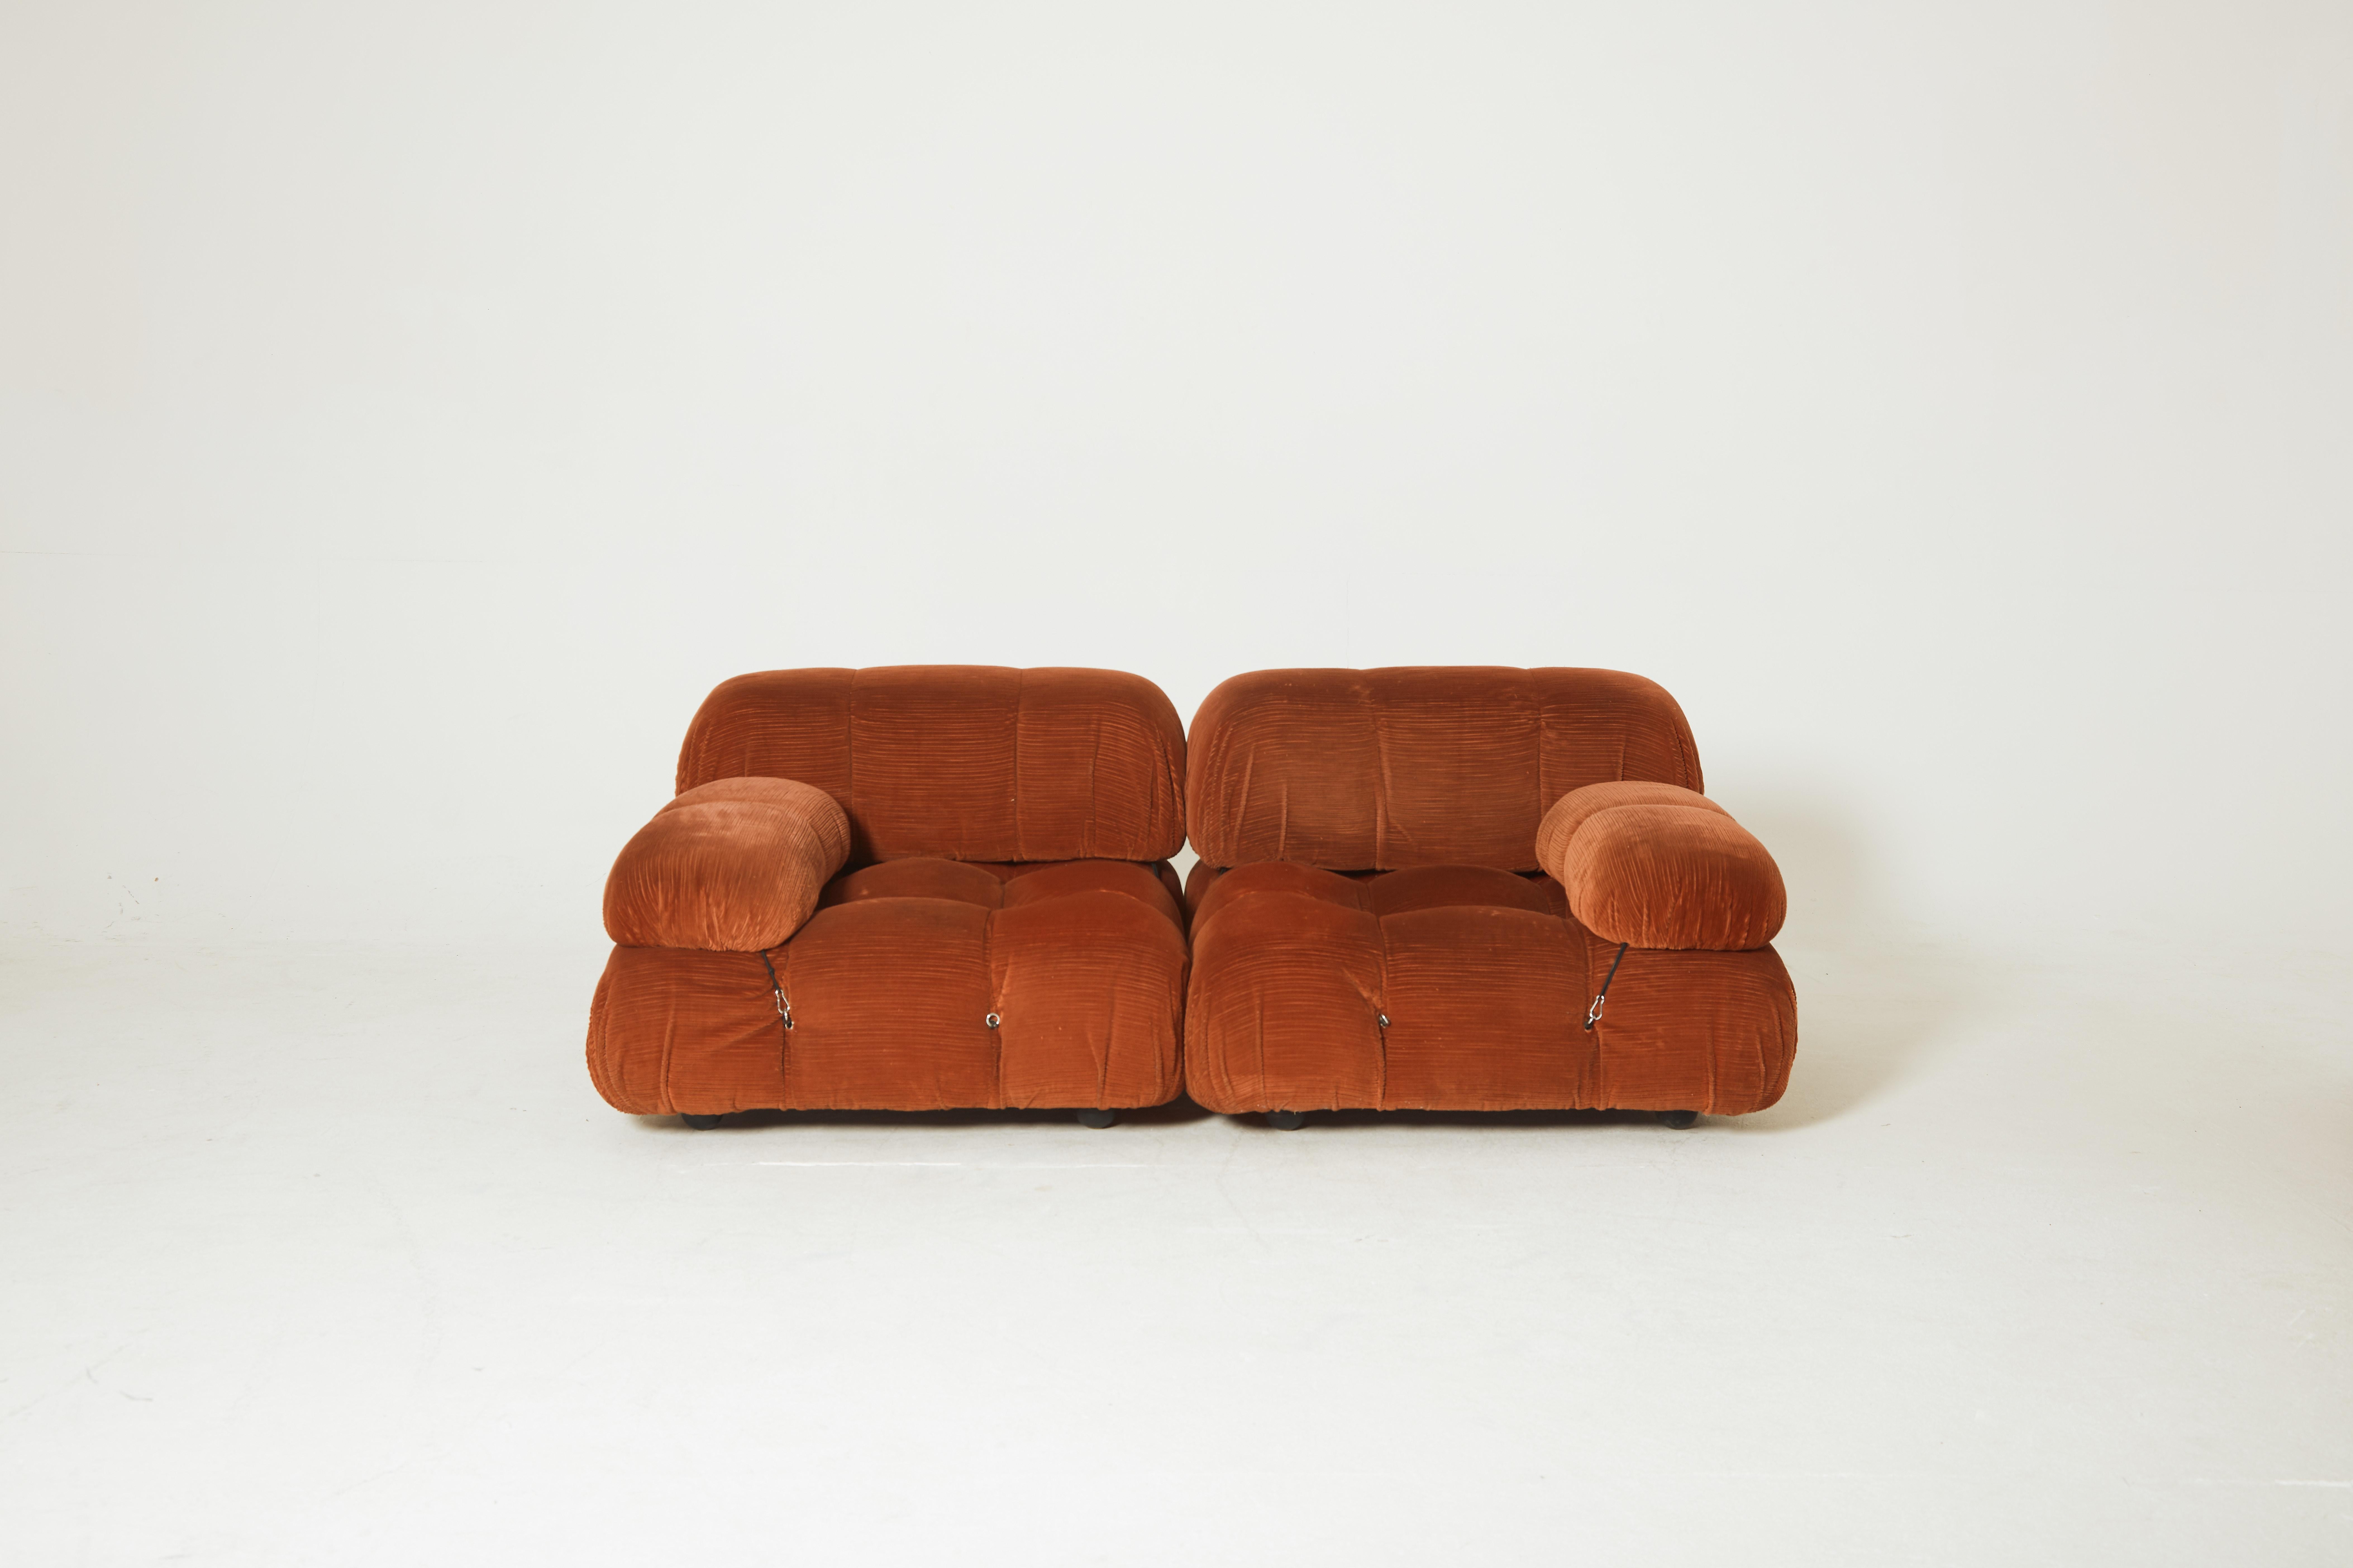 An extremely comfortable early two-seat / element Mario Bellini Camaleonda Modular Sofa. In original rusty orange fabric, made by C&B Italia (pre-B&B Italia), Italy, 1970s. All parts are interchangeable. Can be purchased as is in its original